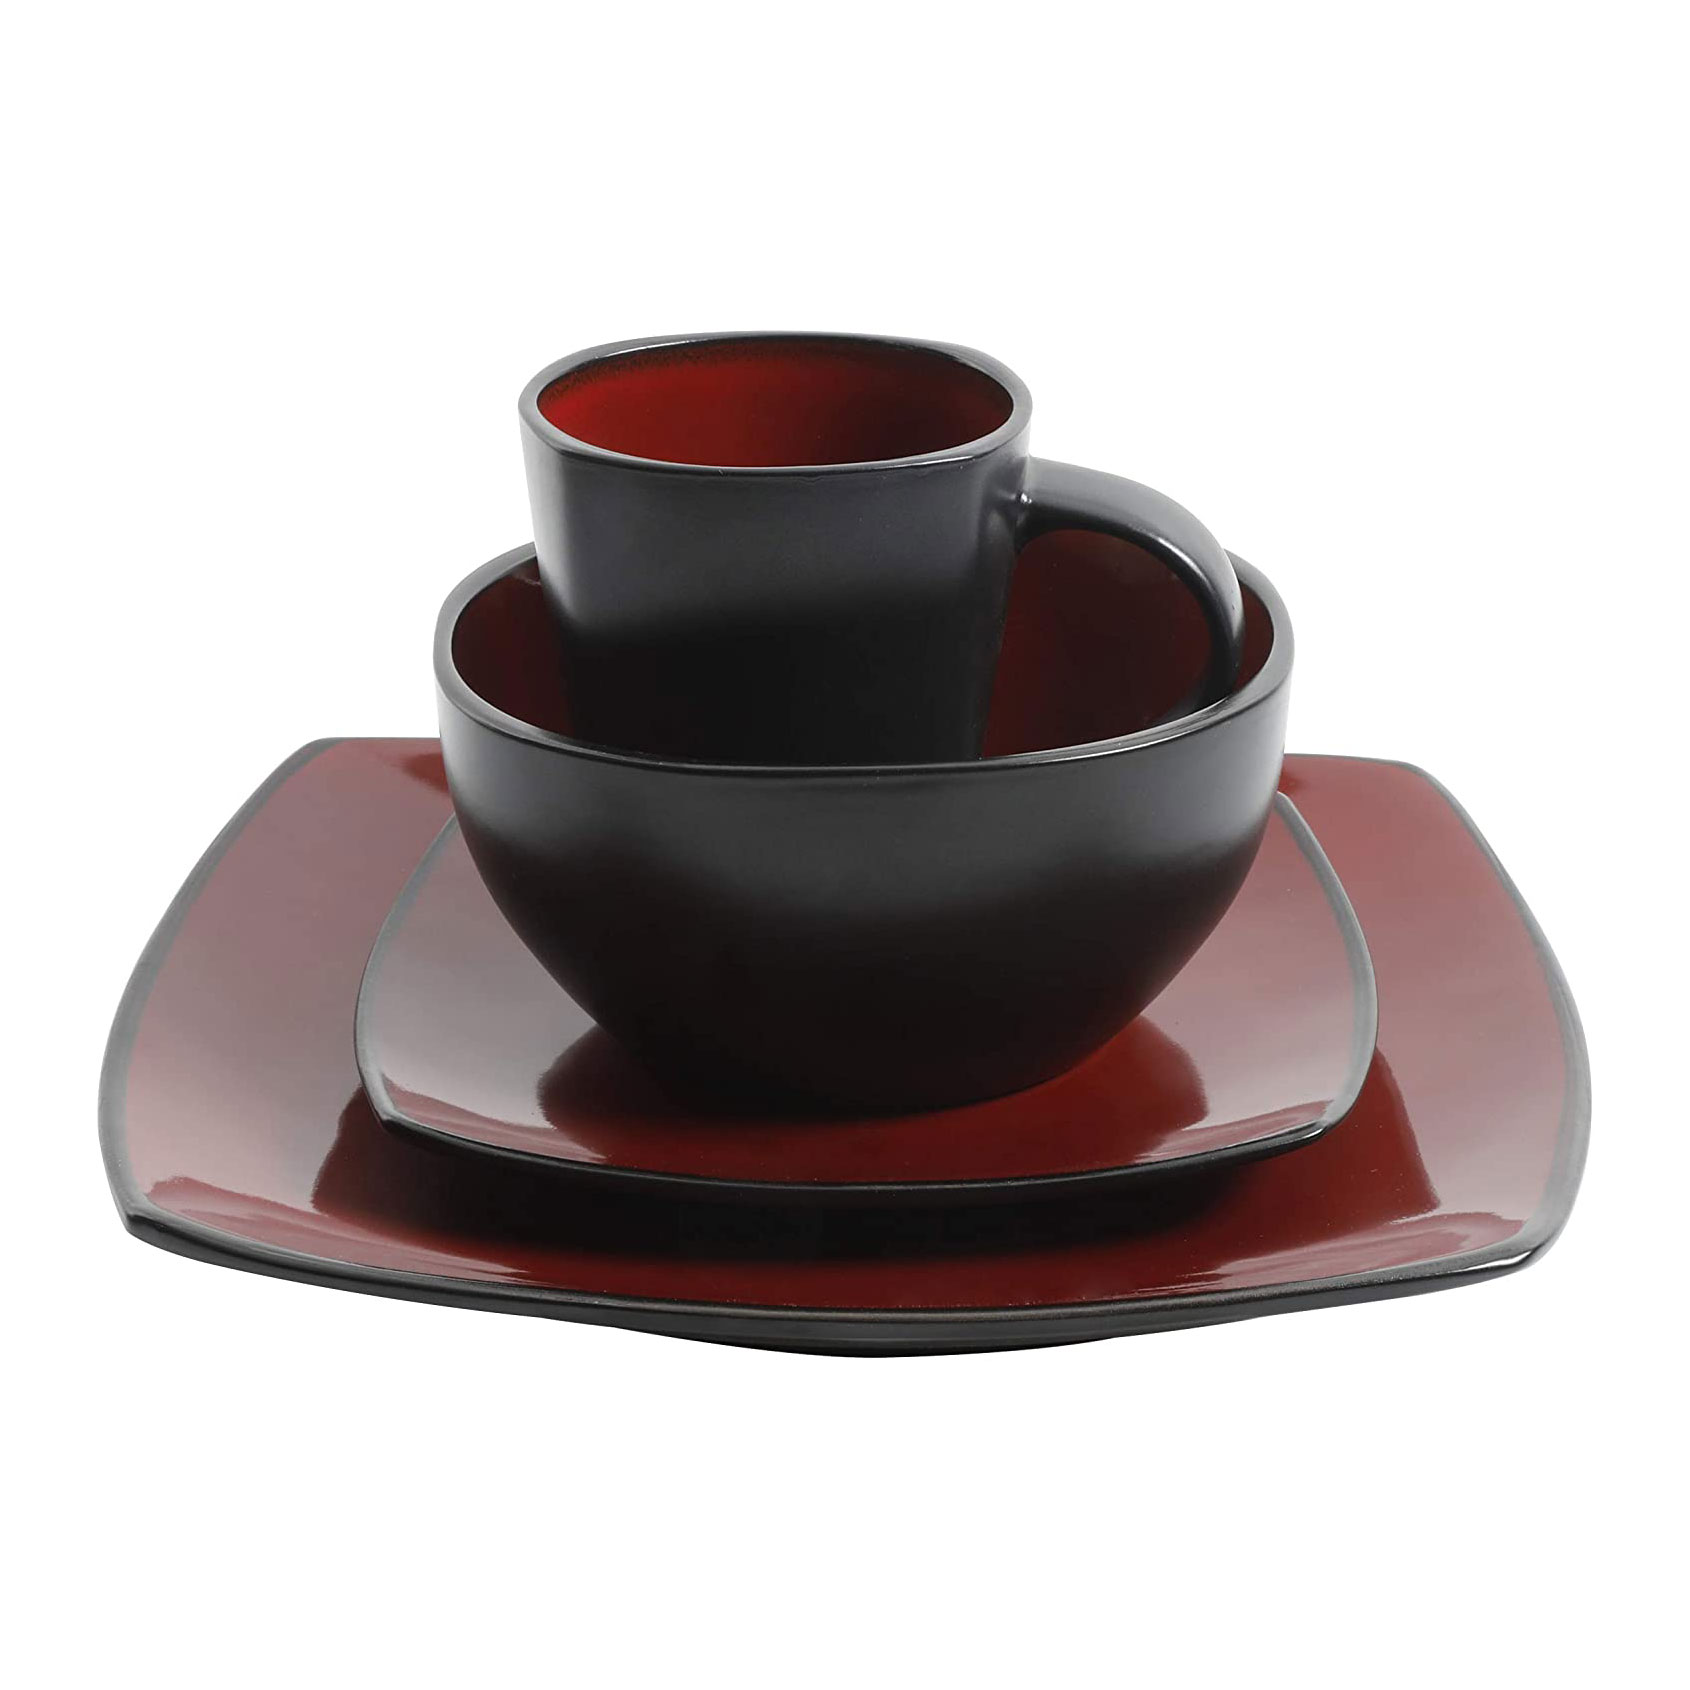 Gibson Soho Lounge Square 16-Piece Dinnerware Set - Red - image 3 of 11